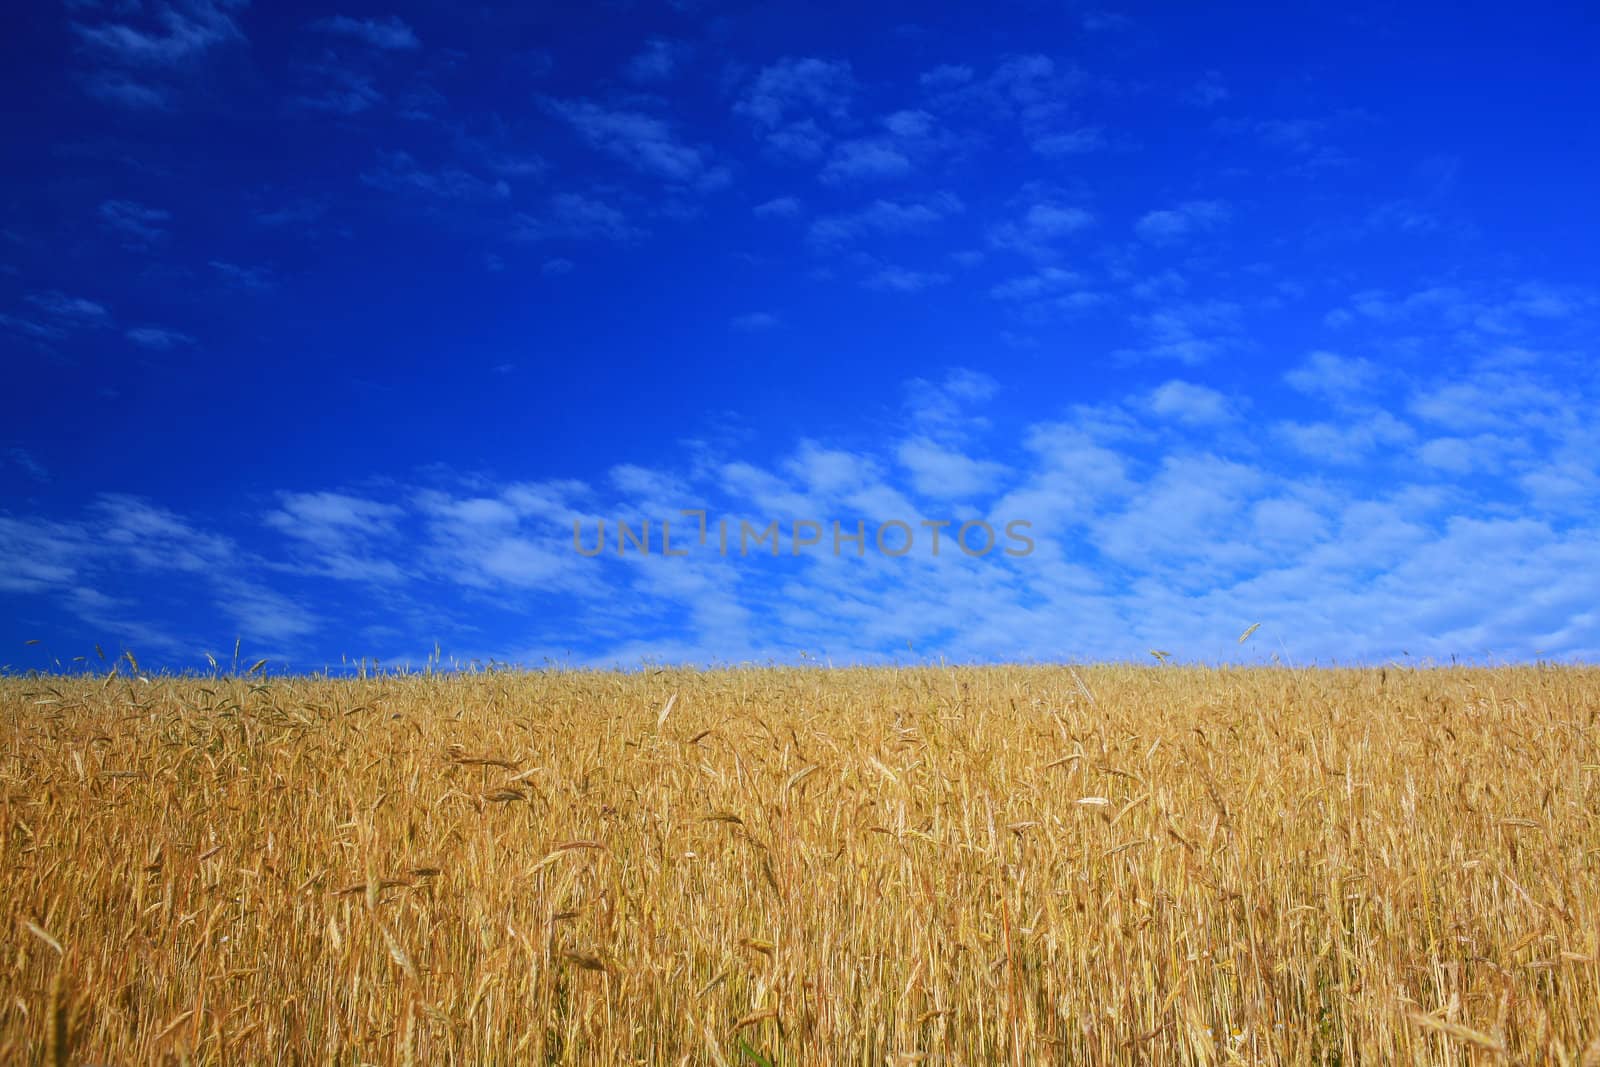 An image of a field with yellow wheat